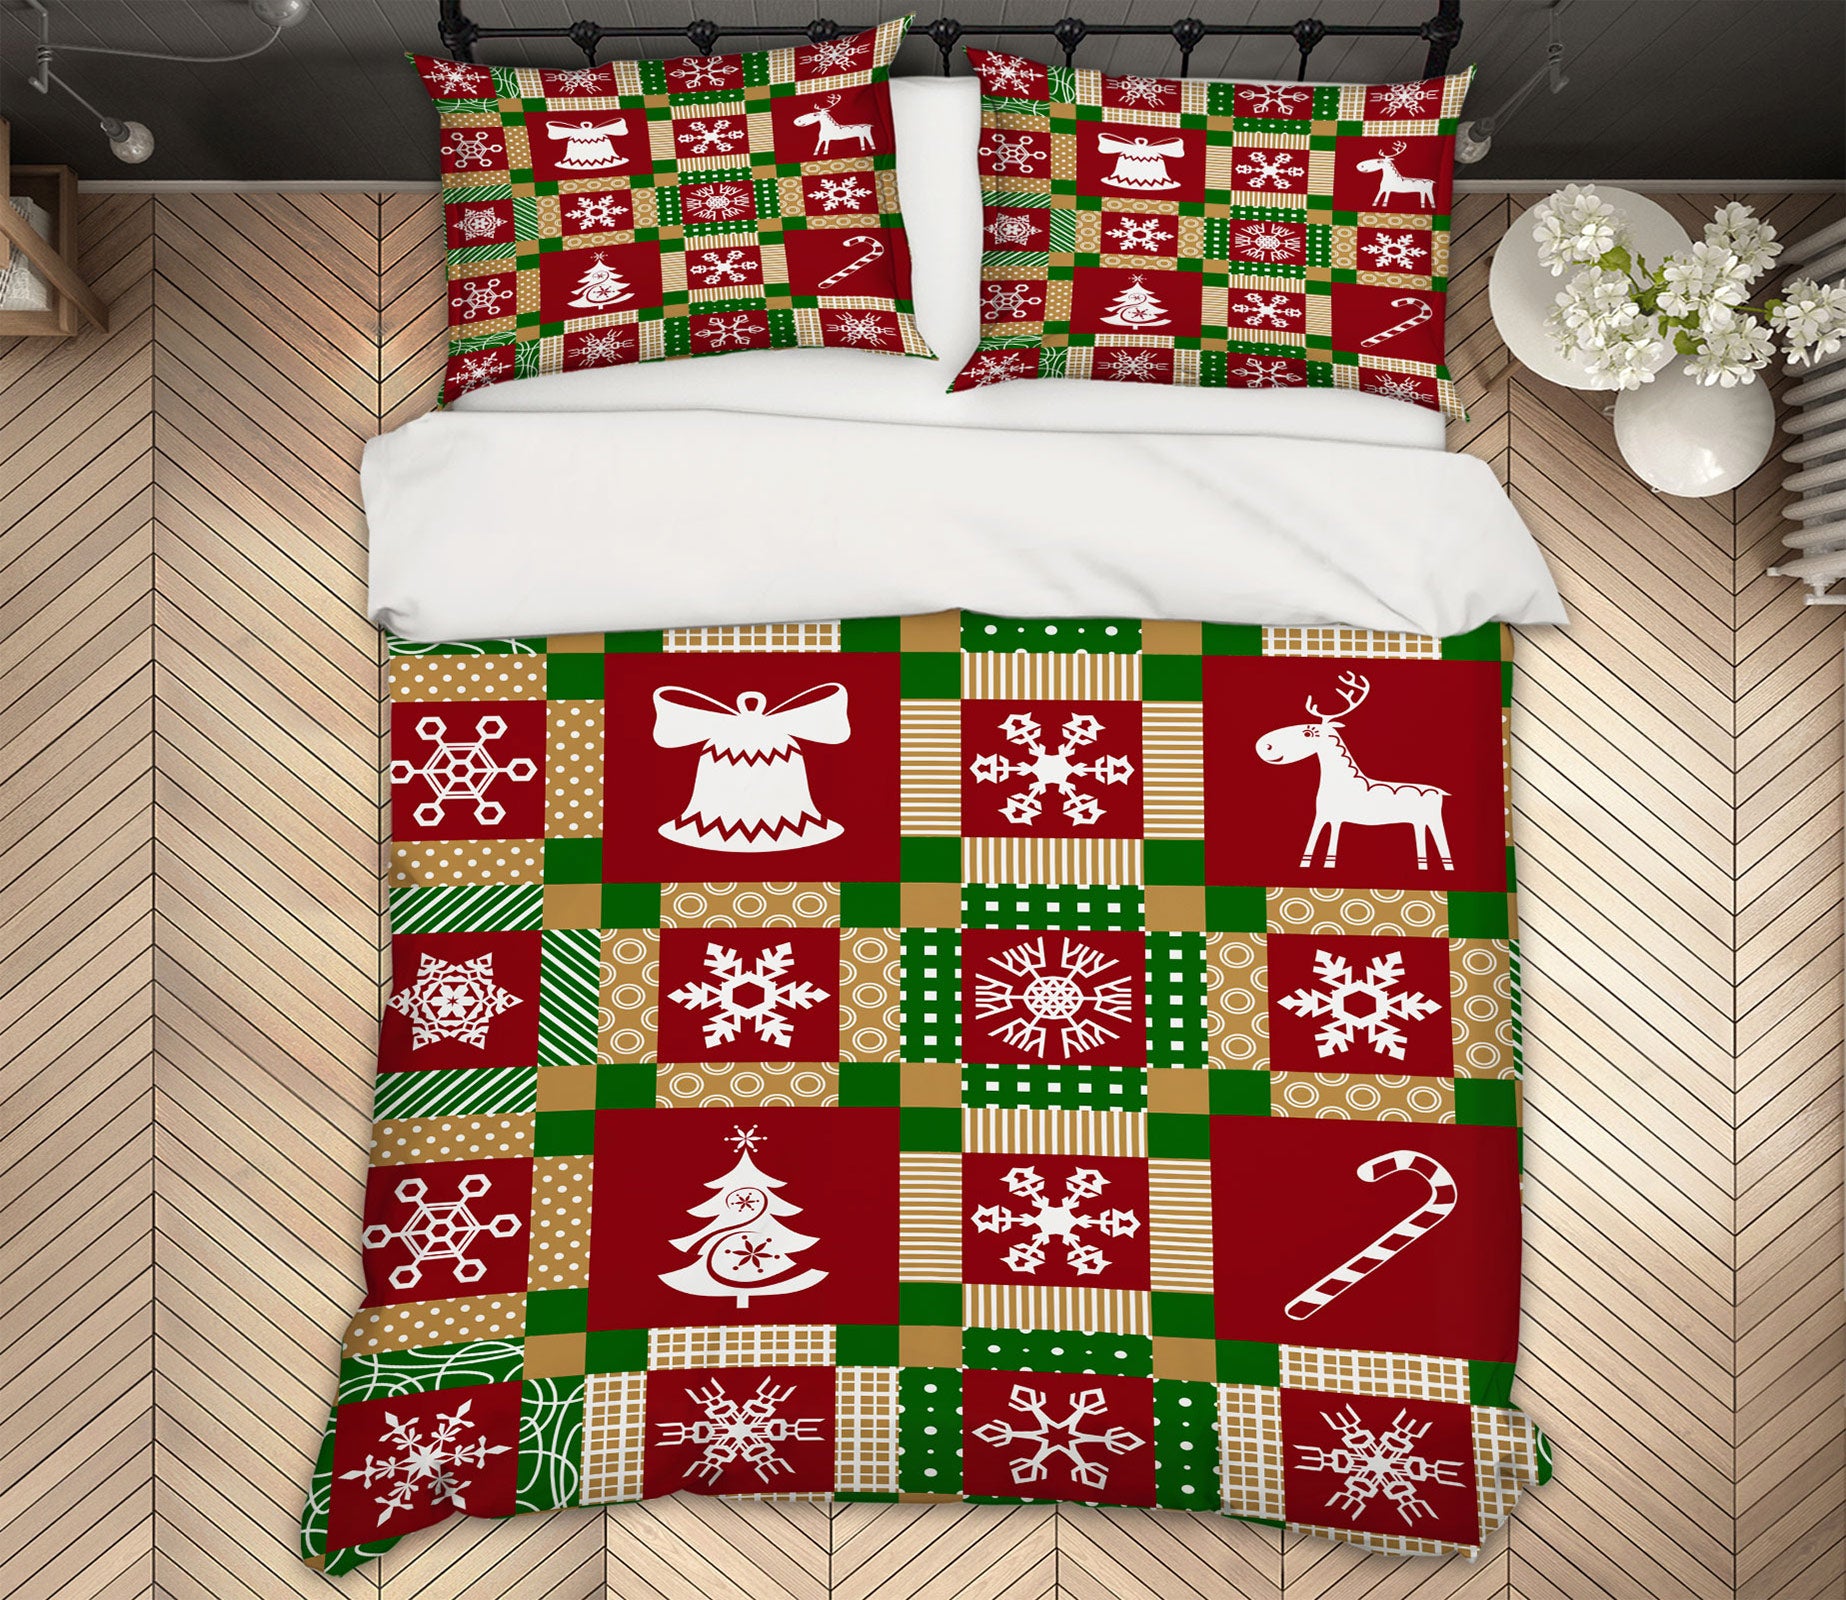 3D Red Square 52194 Christmas Quilt Duvet Cover Xmas Bed Pillowcases